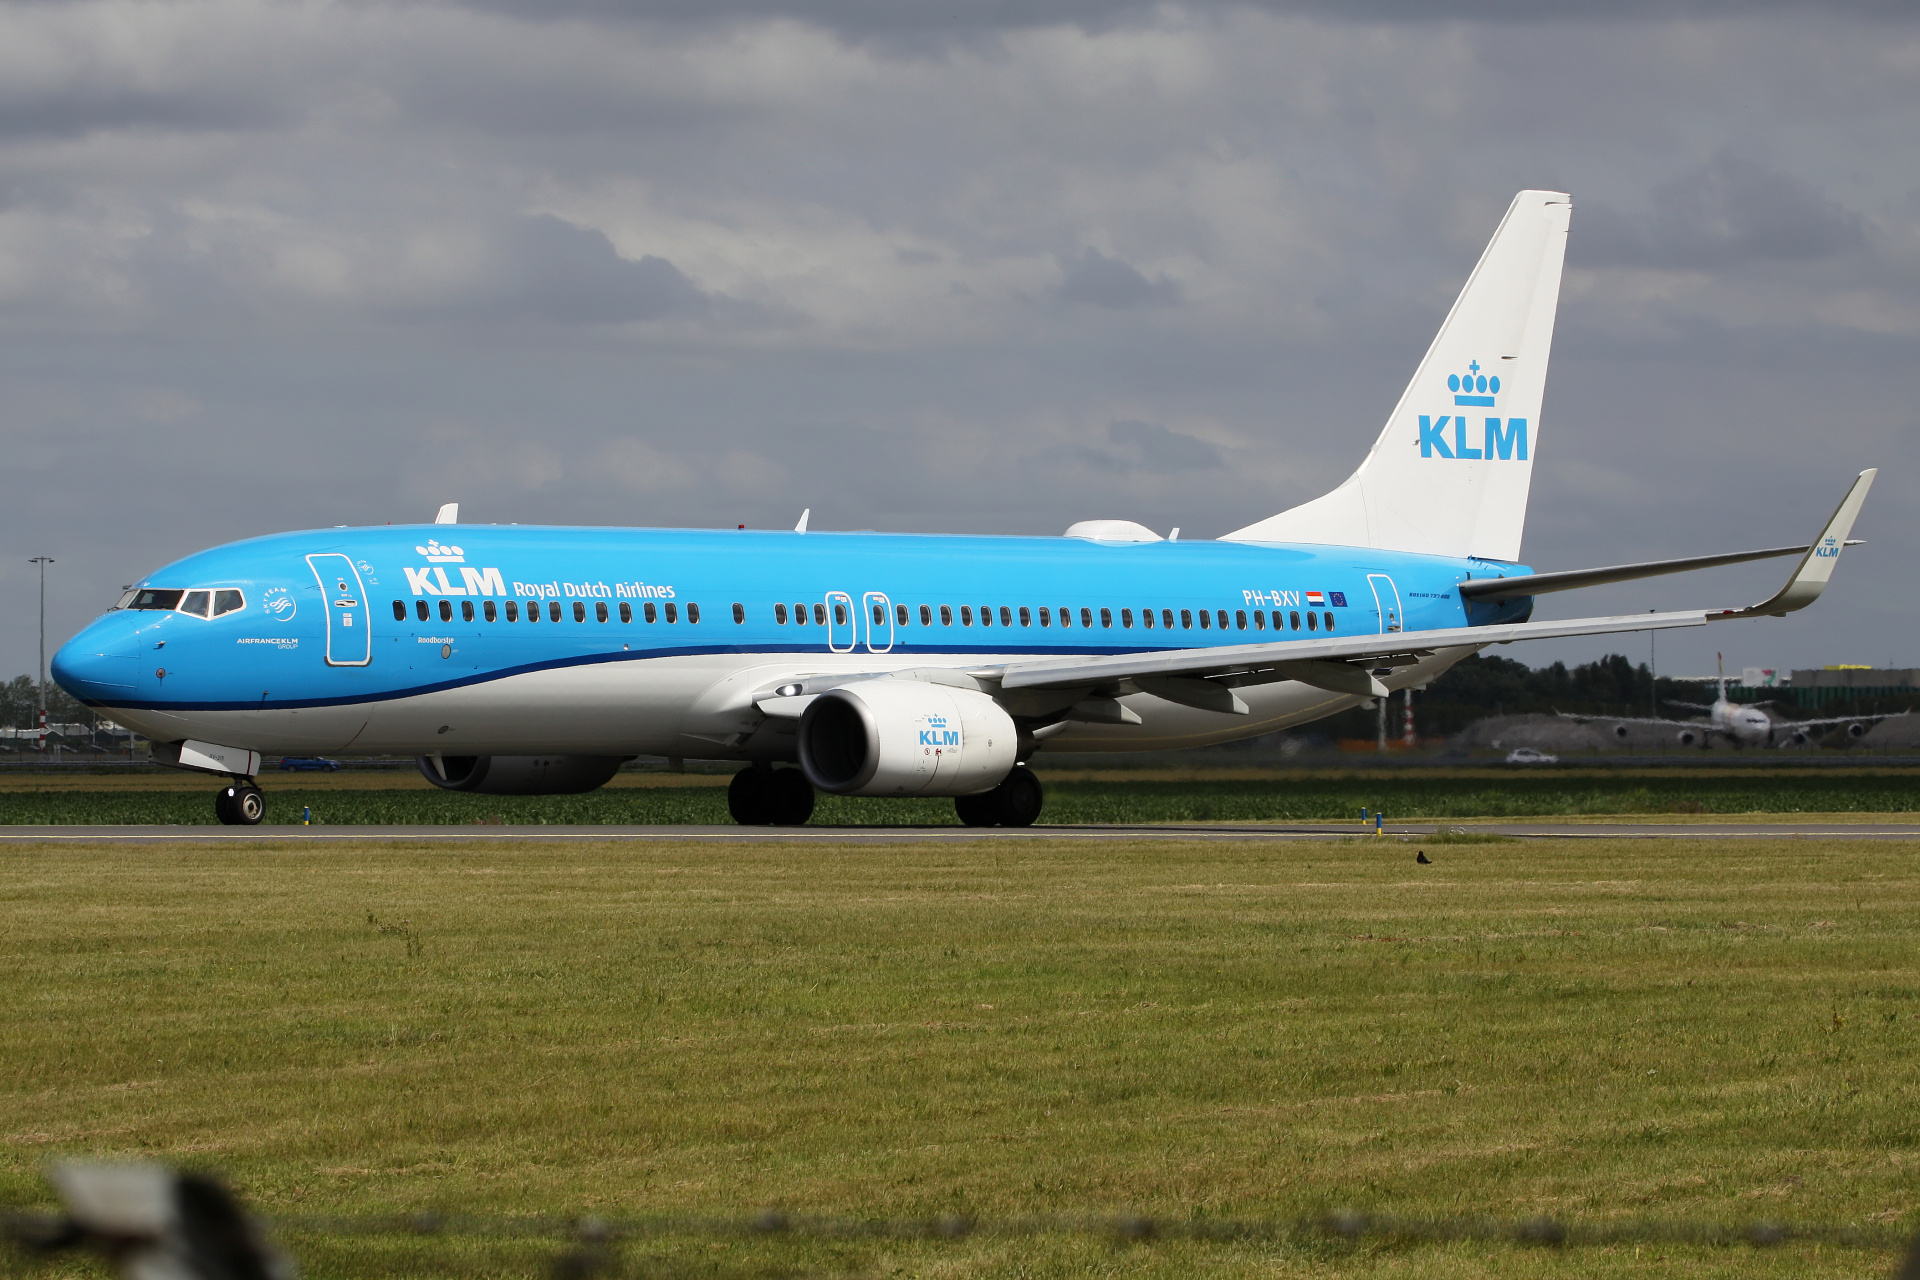 PH-BXV (Aircraft » Schiphol Spotting » Boeing 737-800 » KLM Royal Dutch Airlines)